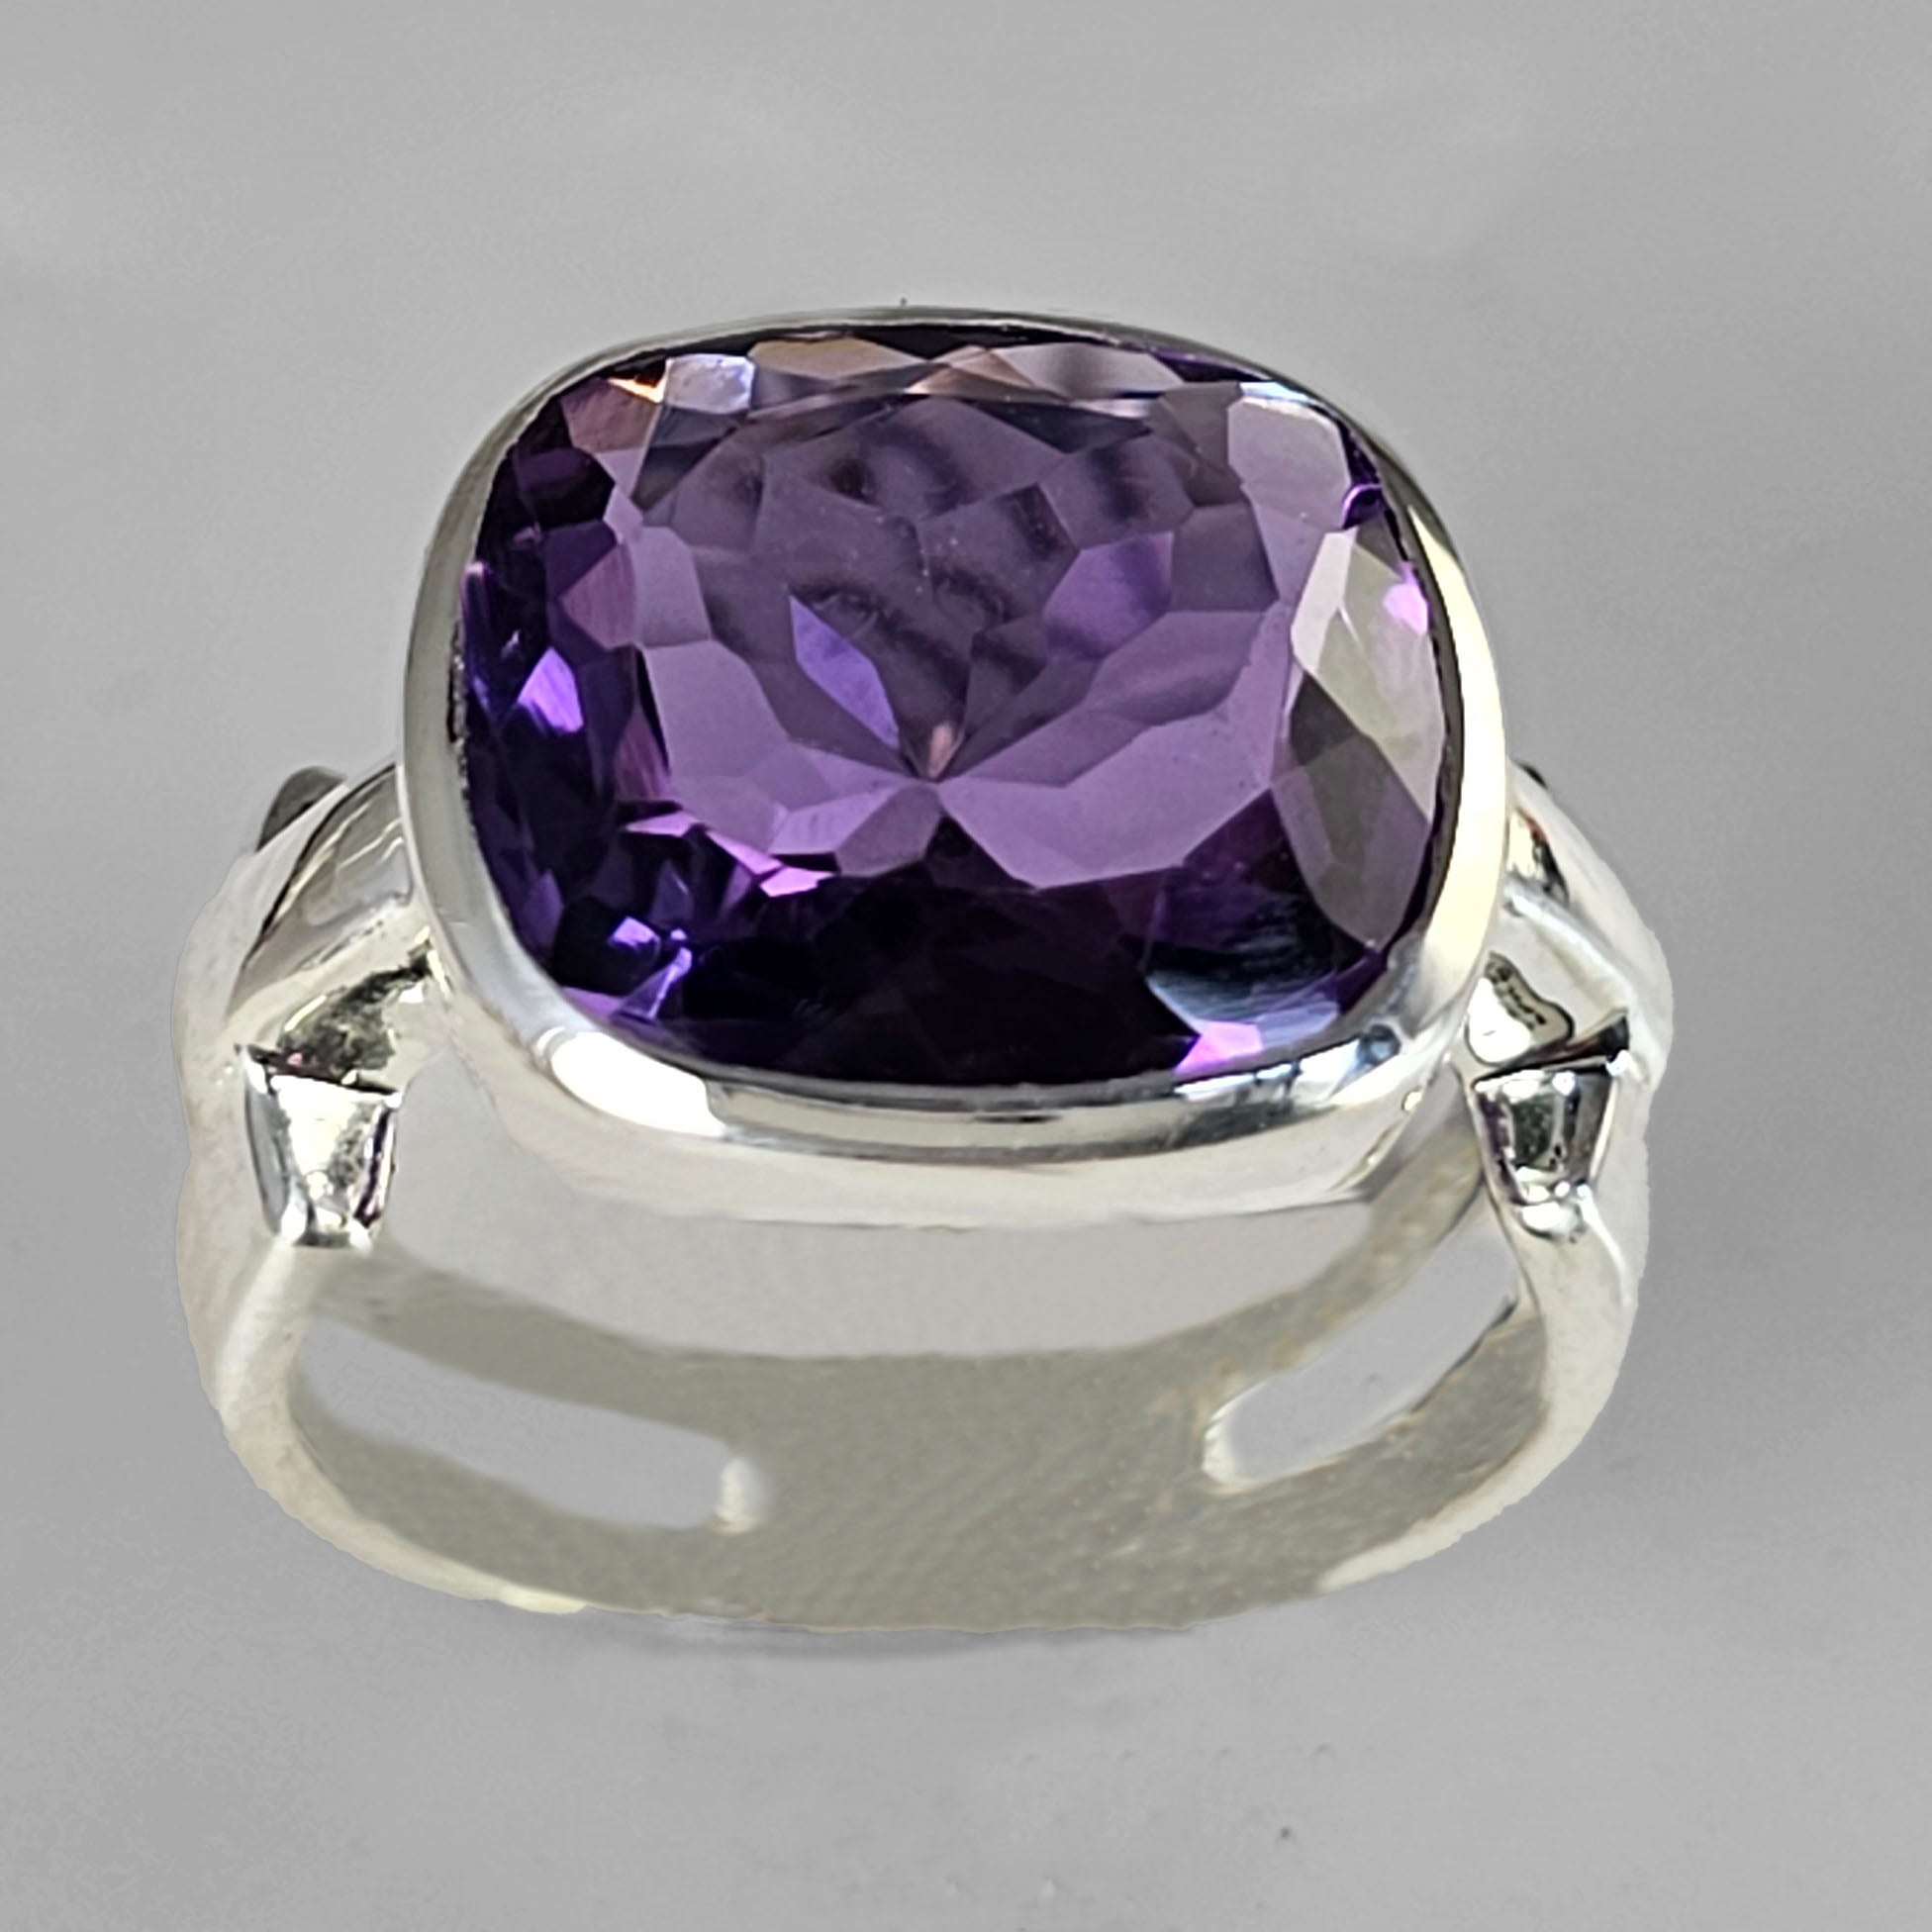 Amethyst 9.75 ct Square Cushion Cut Bezel Set Sterling Silver Ring, Size 7